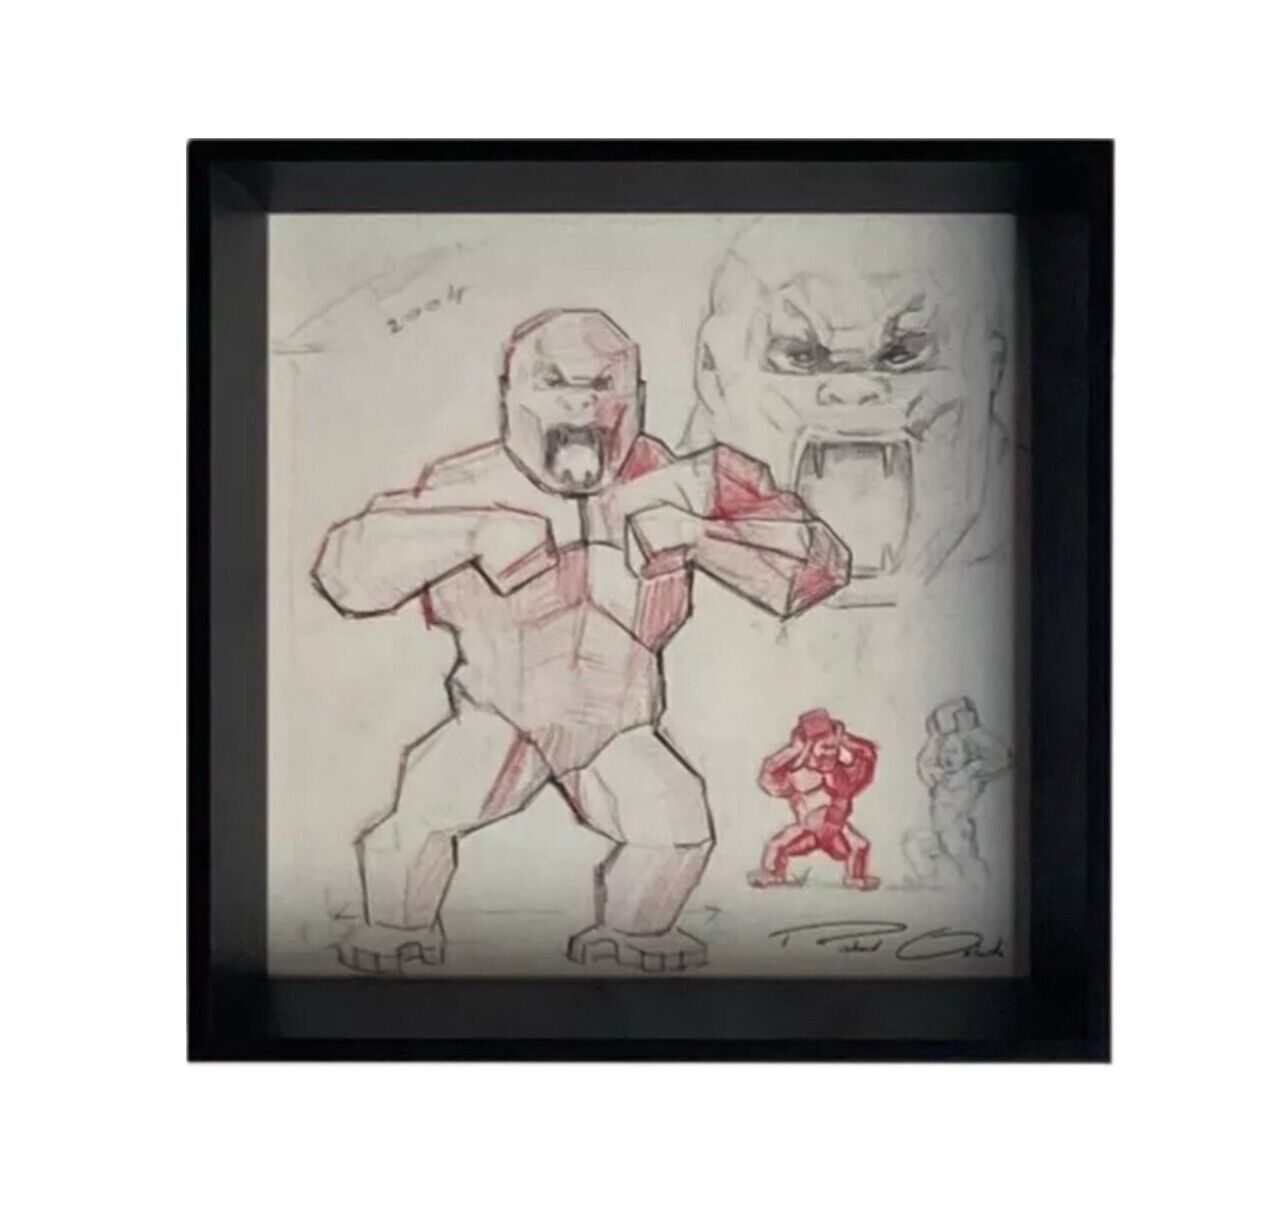 Richard Orlinski: Exclusive Digigraphy “Wild Kong” – EXTREMELY RARE PIECE...